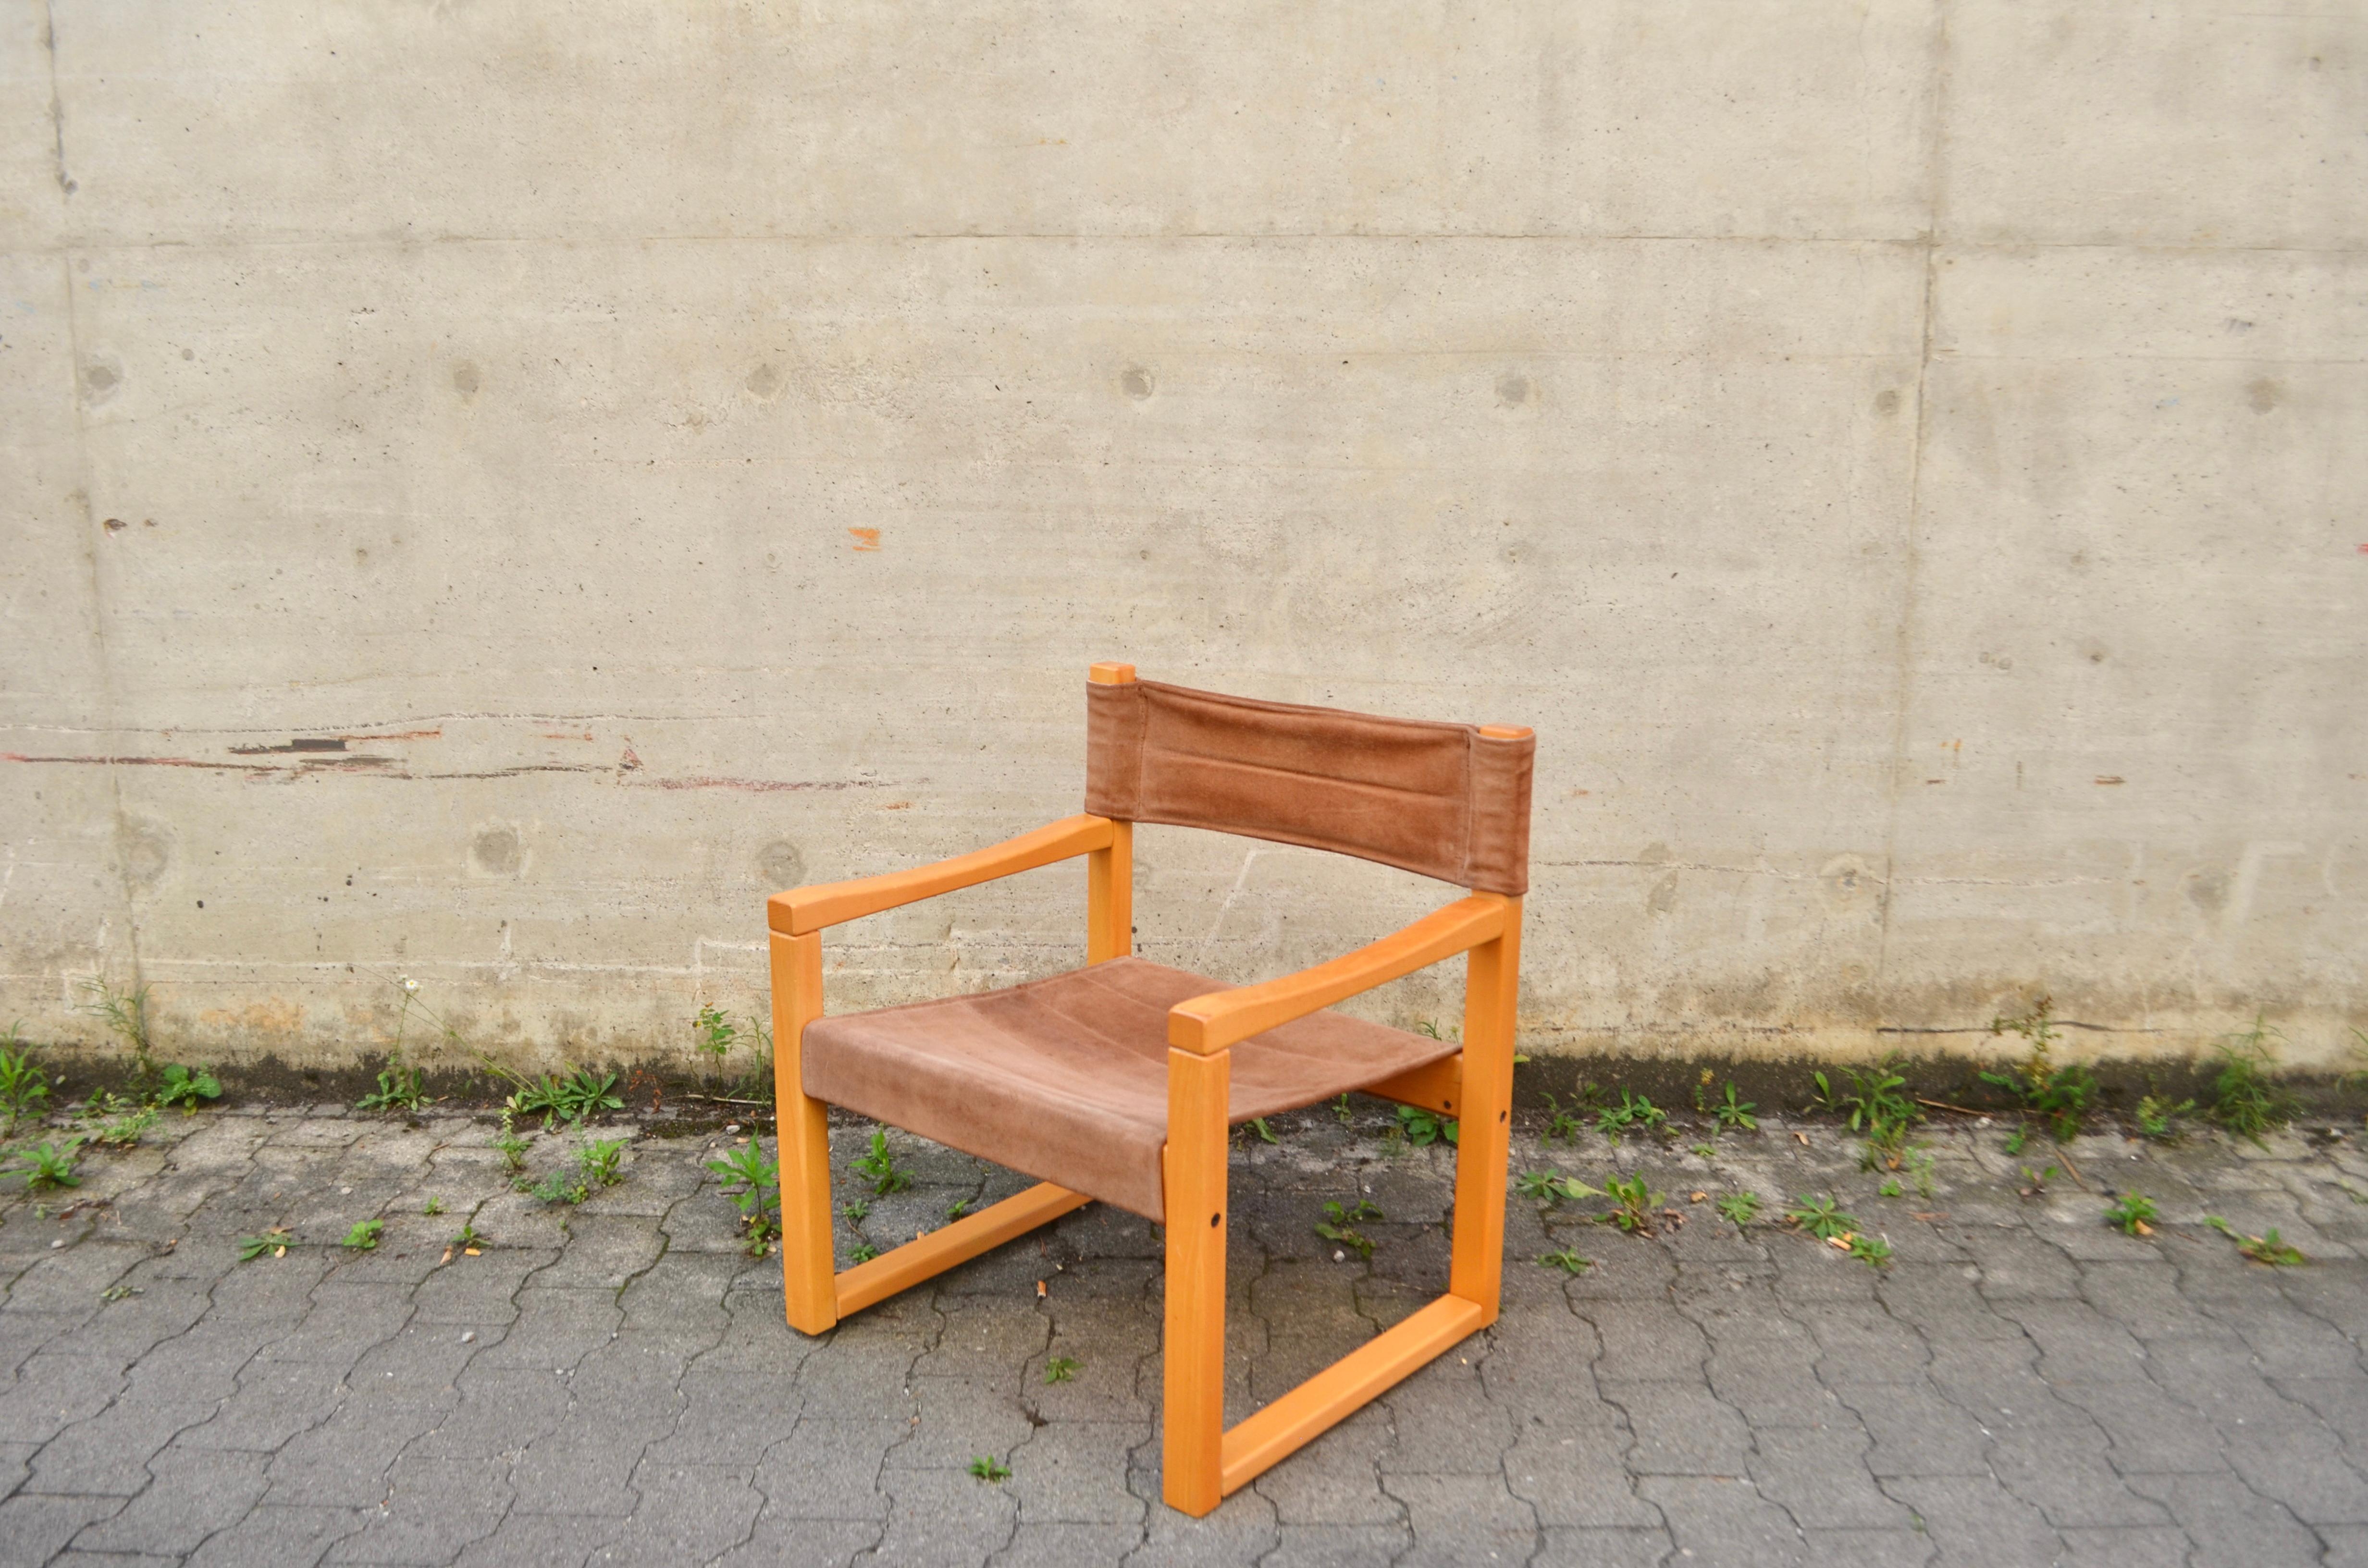 Karin Mobring Model Diana brown Cognac Sling Lounge Chair Vintage Ikea, 1 of 2 In Good Condition For Sale In Munich, Bavaria